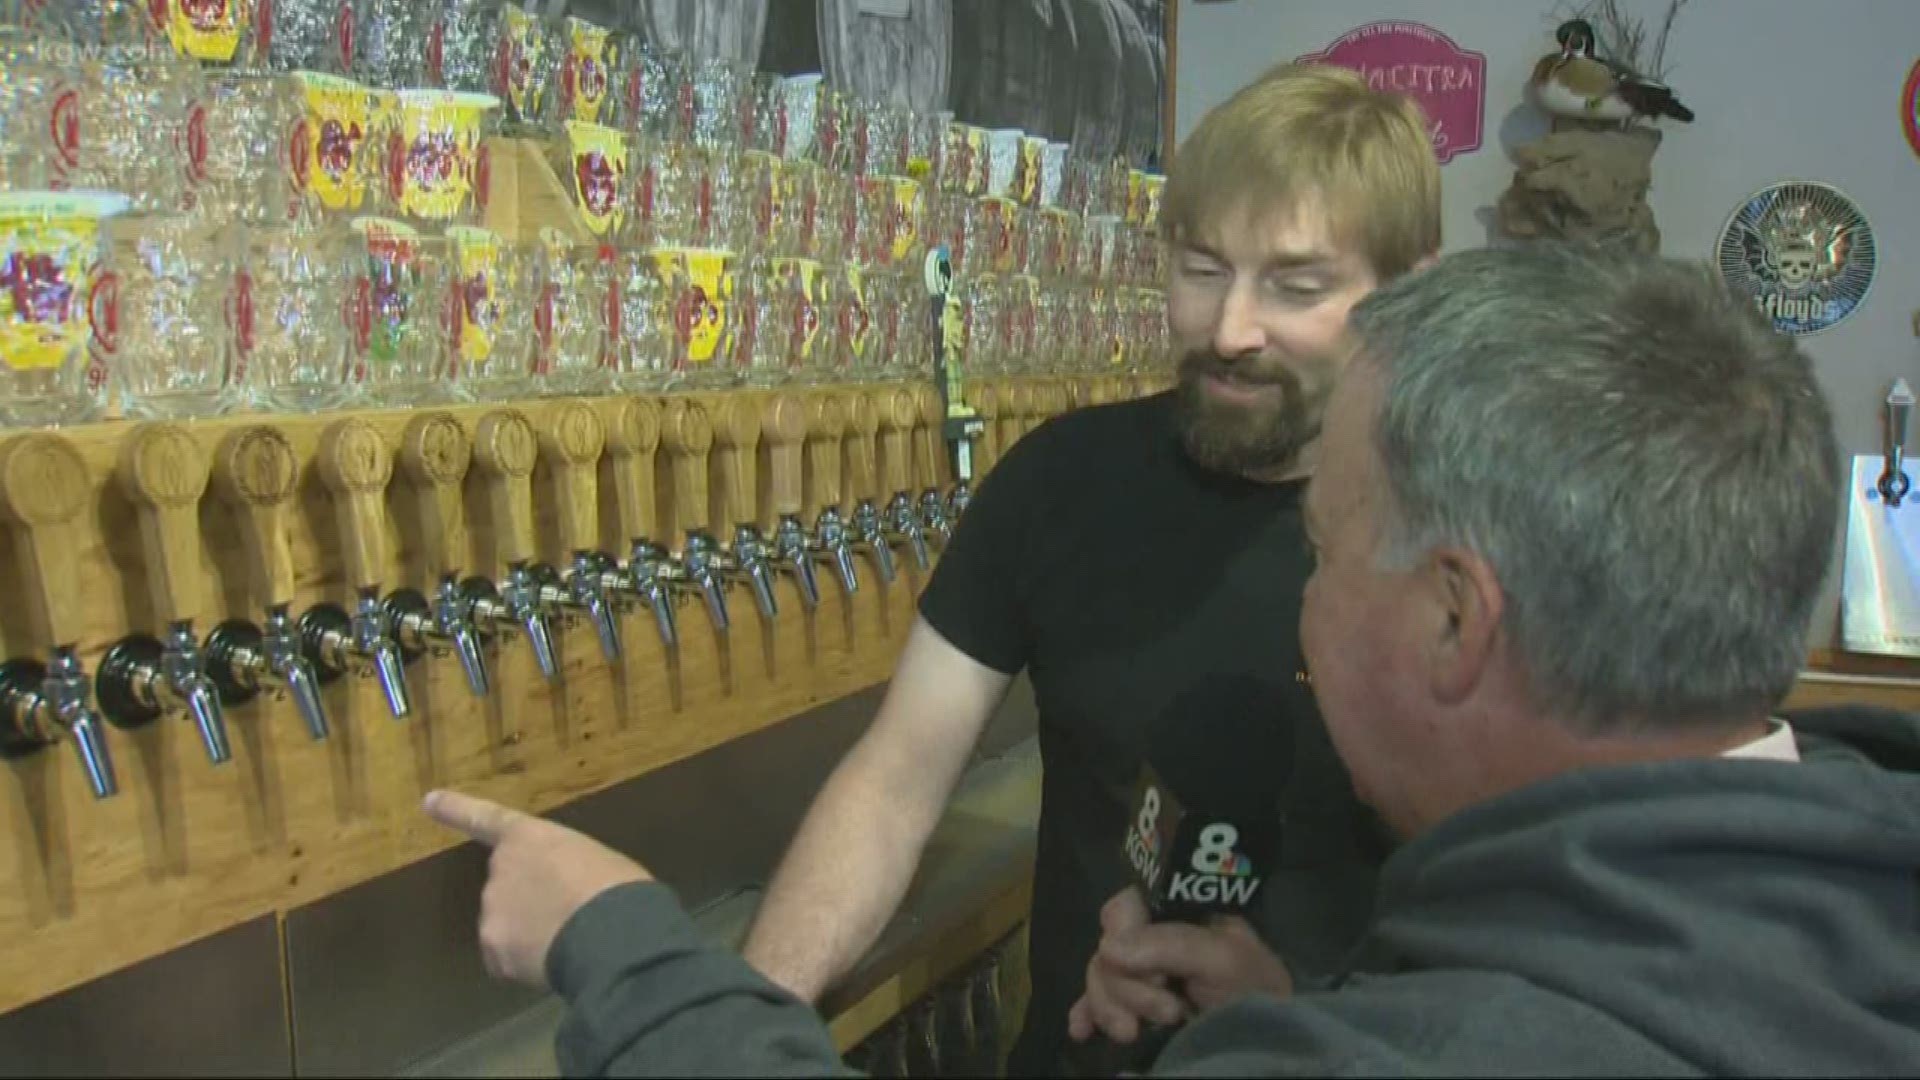 Sixty-five beers on tap lures Rod to West Valley Taphouse and bric-a-brac to Main Street Emporium.